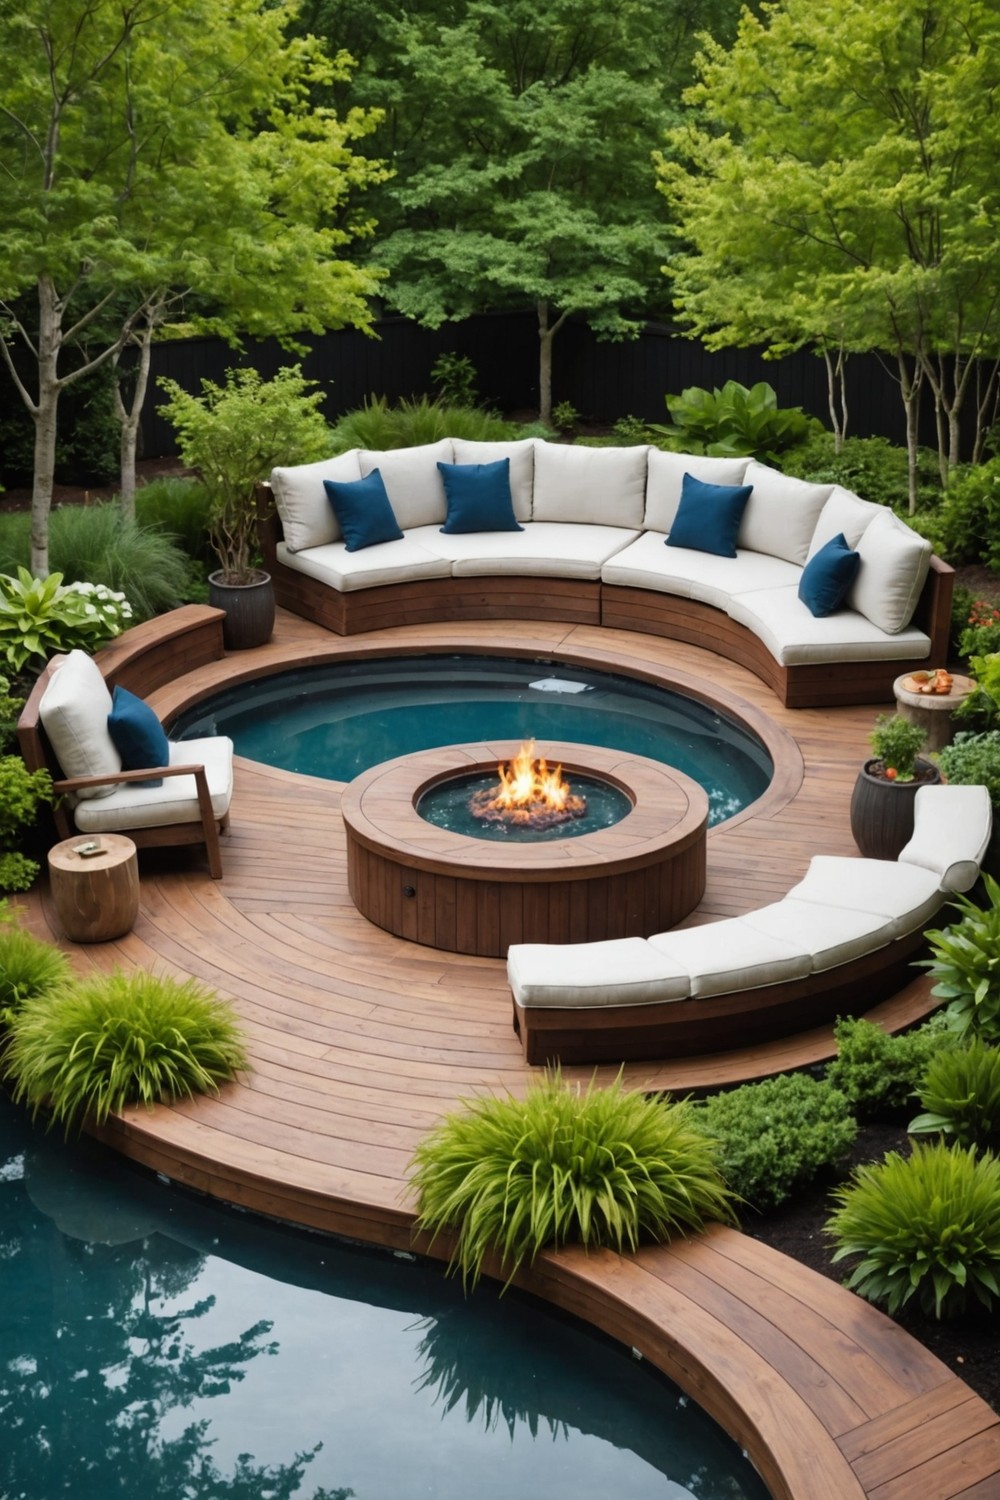 Floating Deck with Built-in Seating